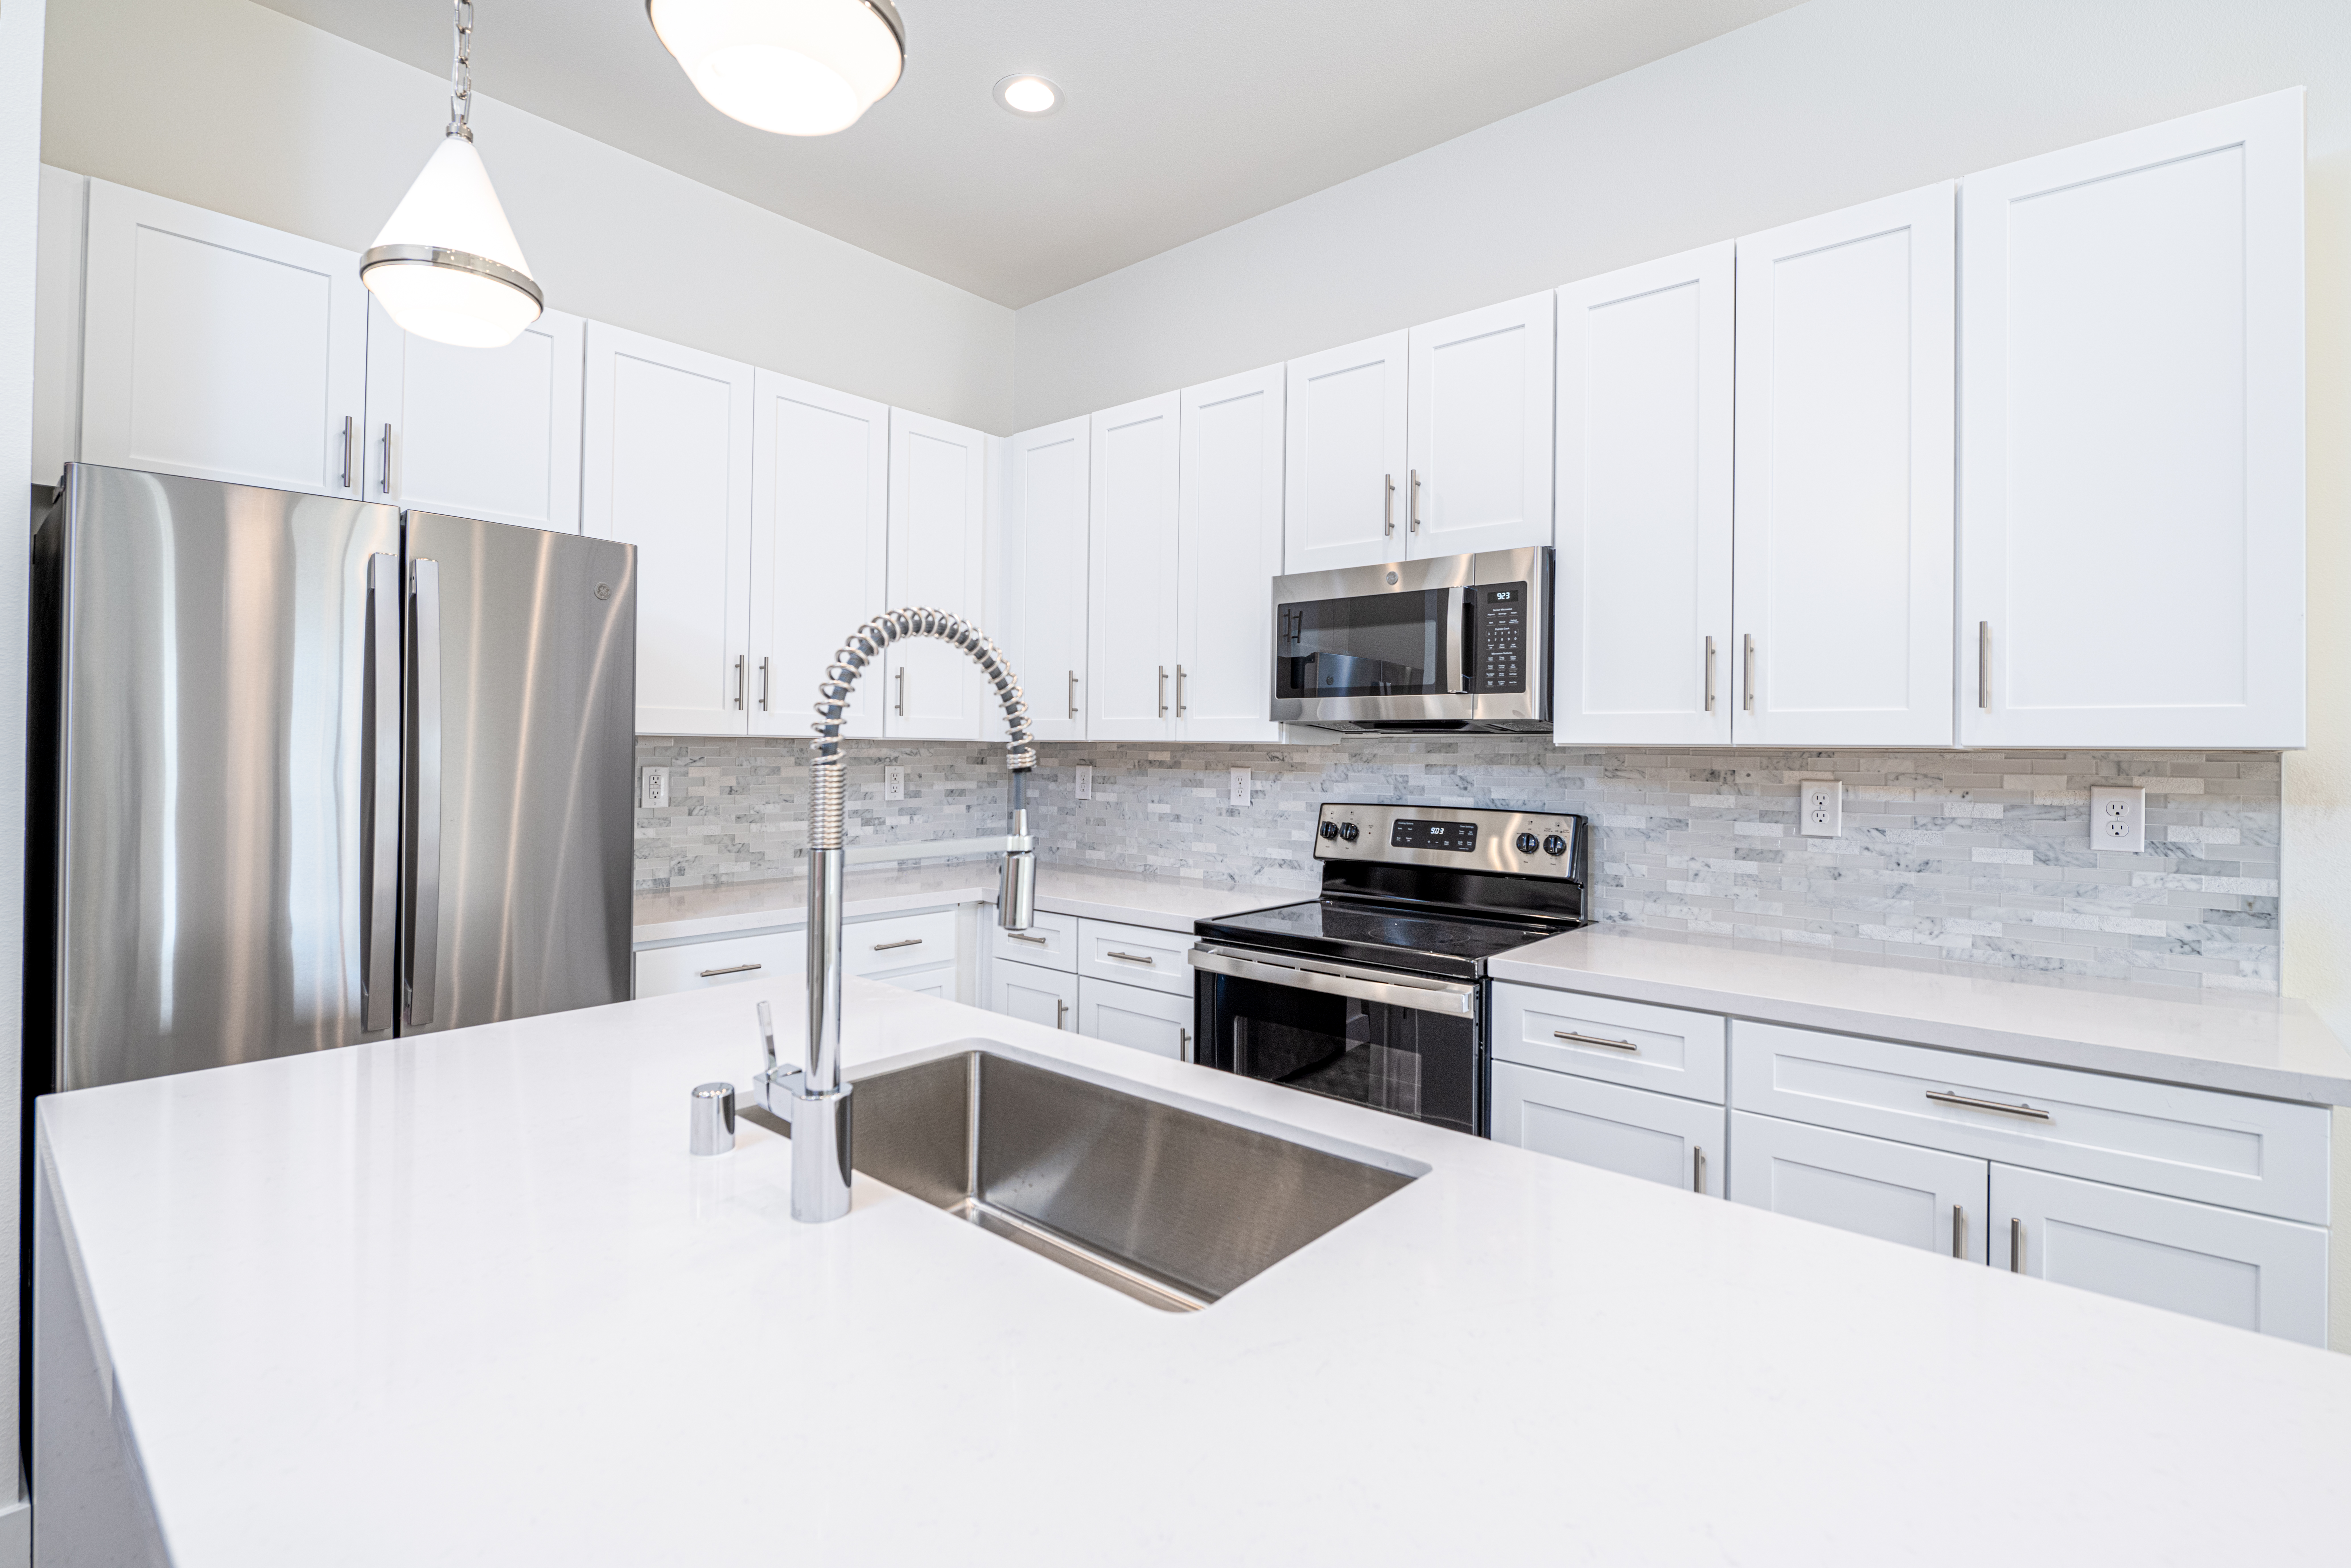 Kitchen of Unit B at Thrive by Edward Homes